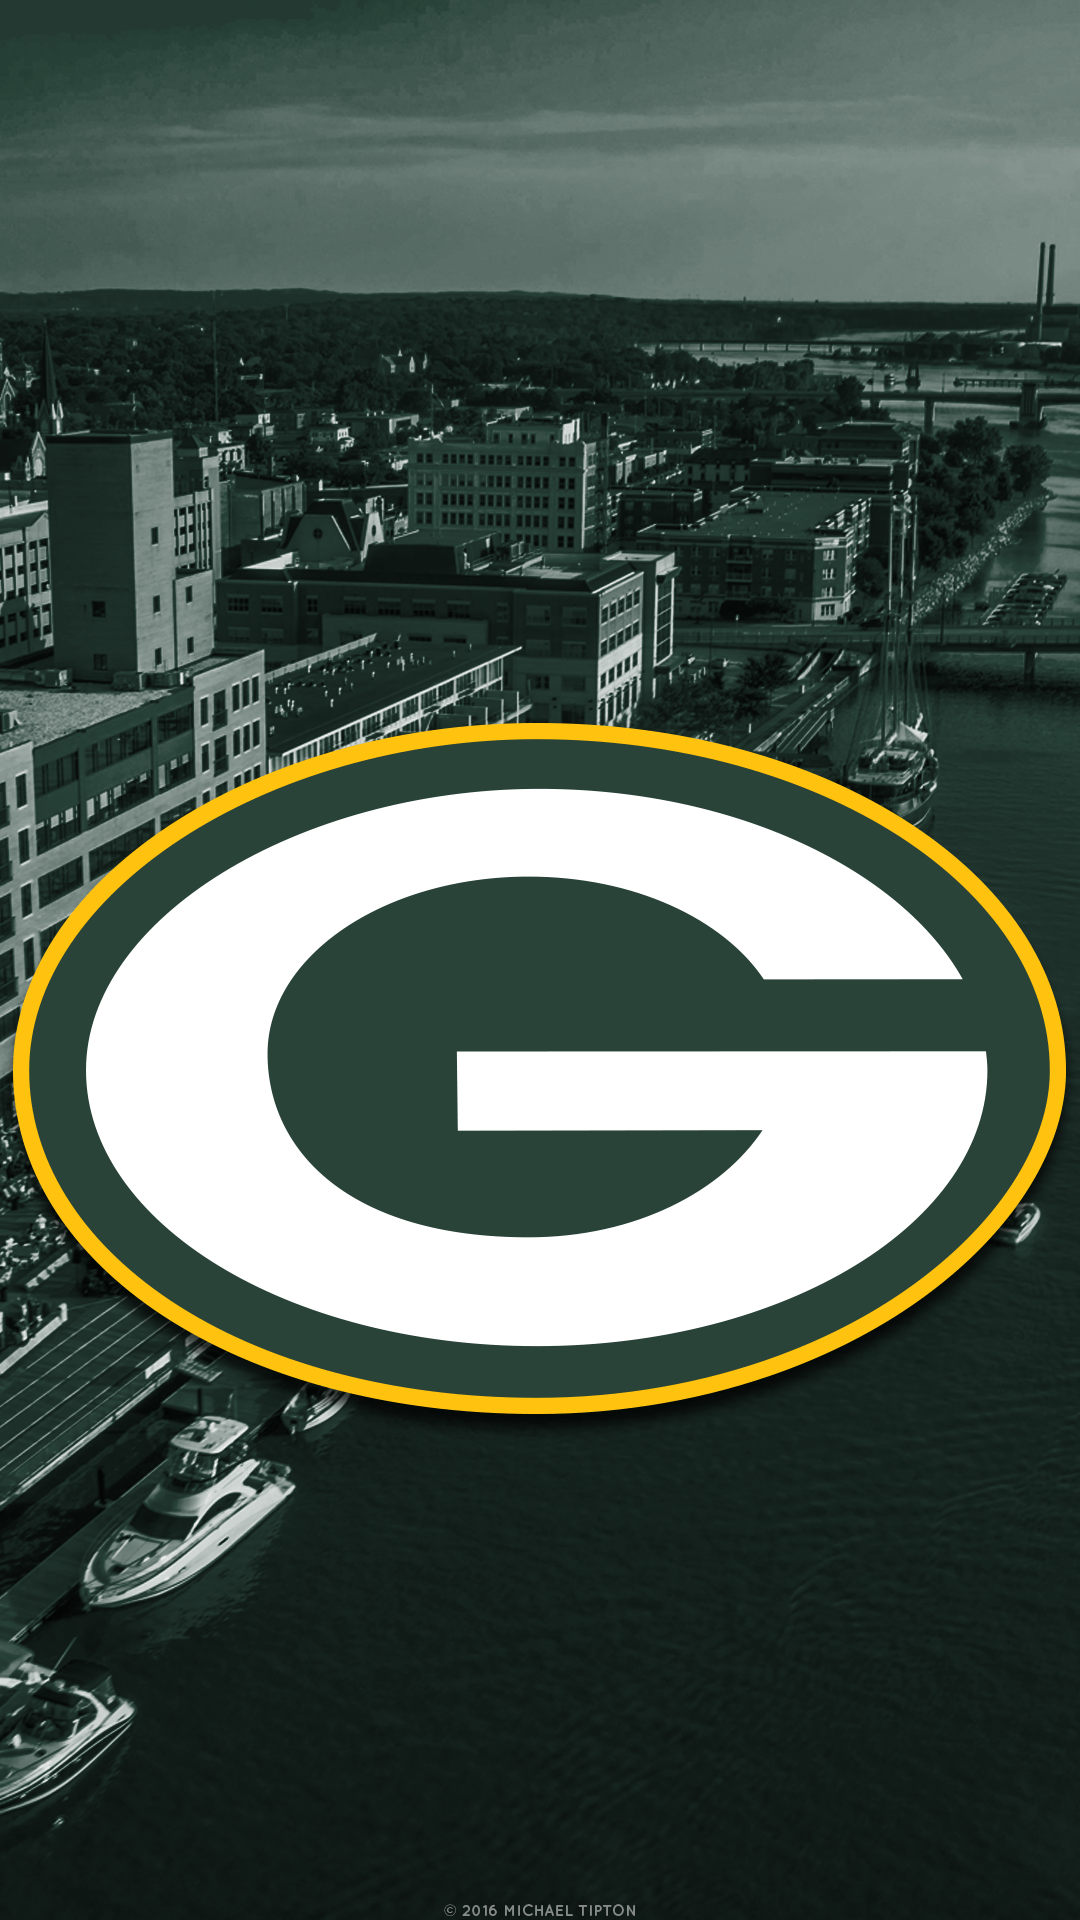 Green Bay Packers Mobile City Wallpaper. packer. Green bay packers